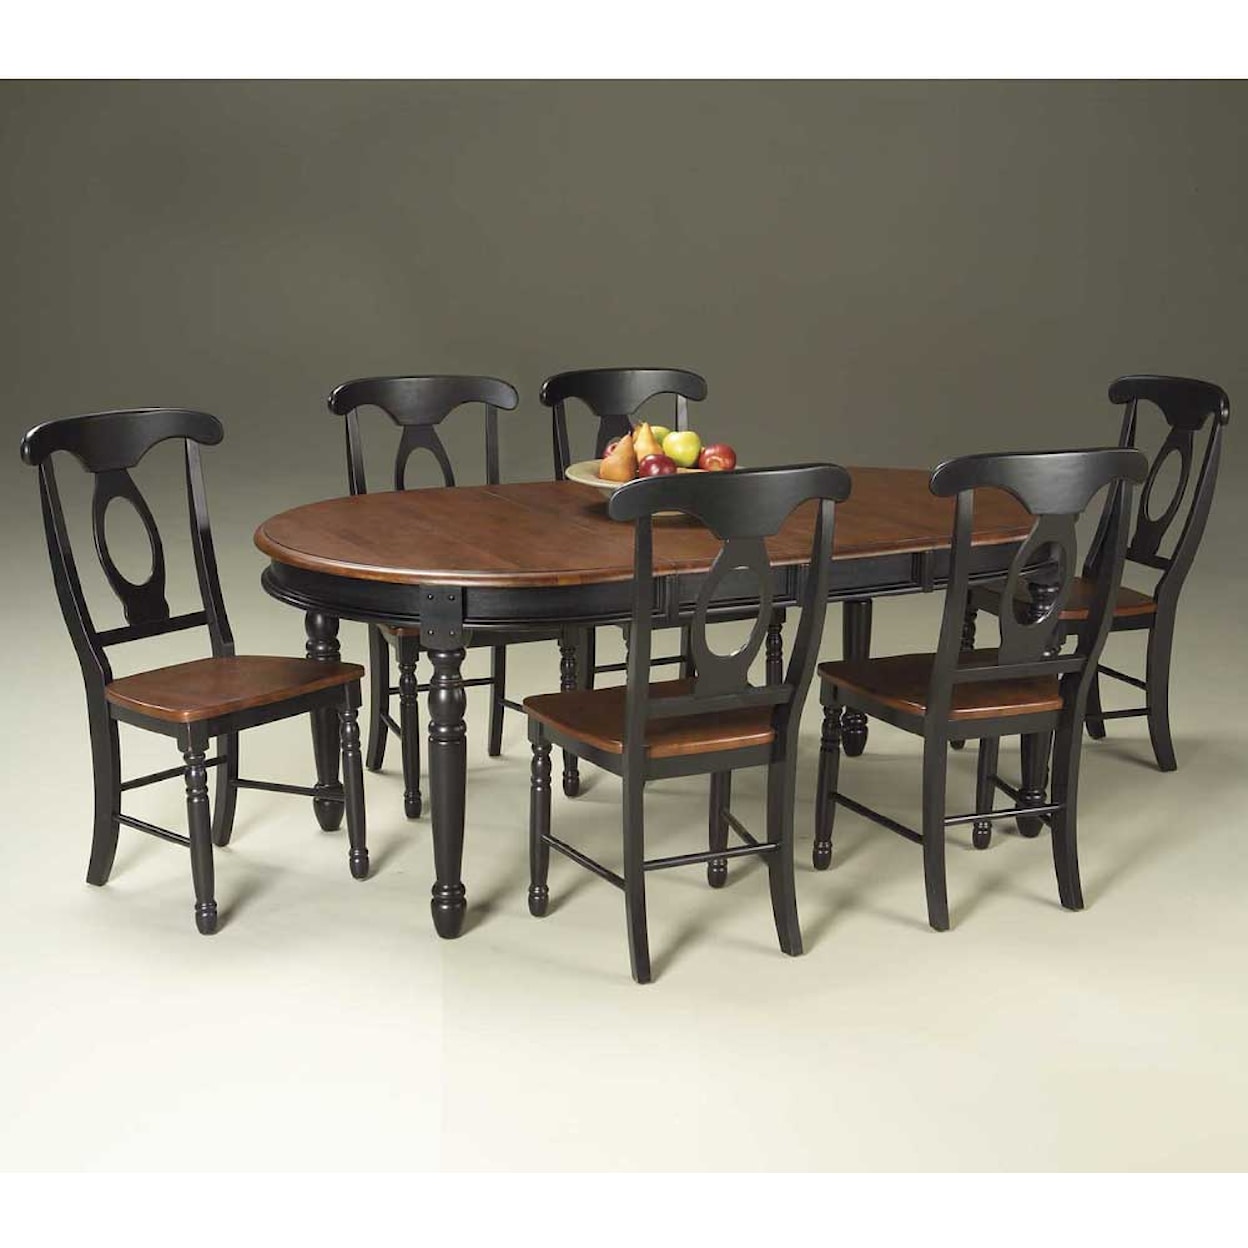 A-A British Isles Oval Leg Table with Chairs